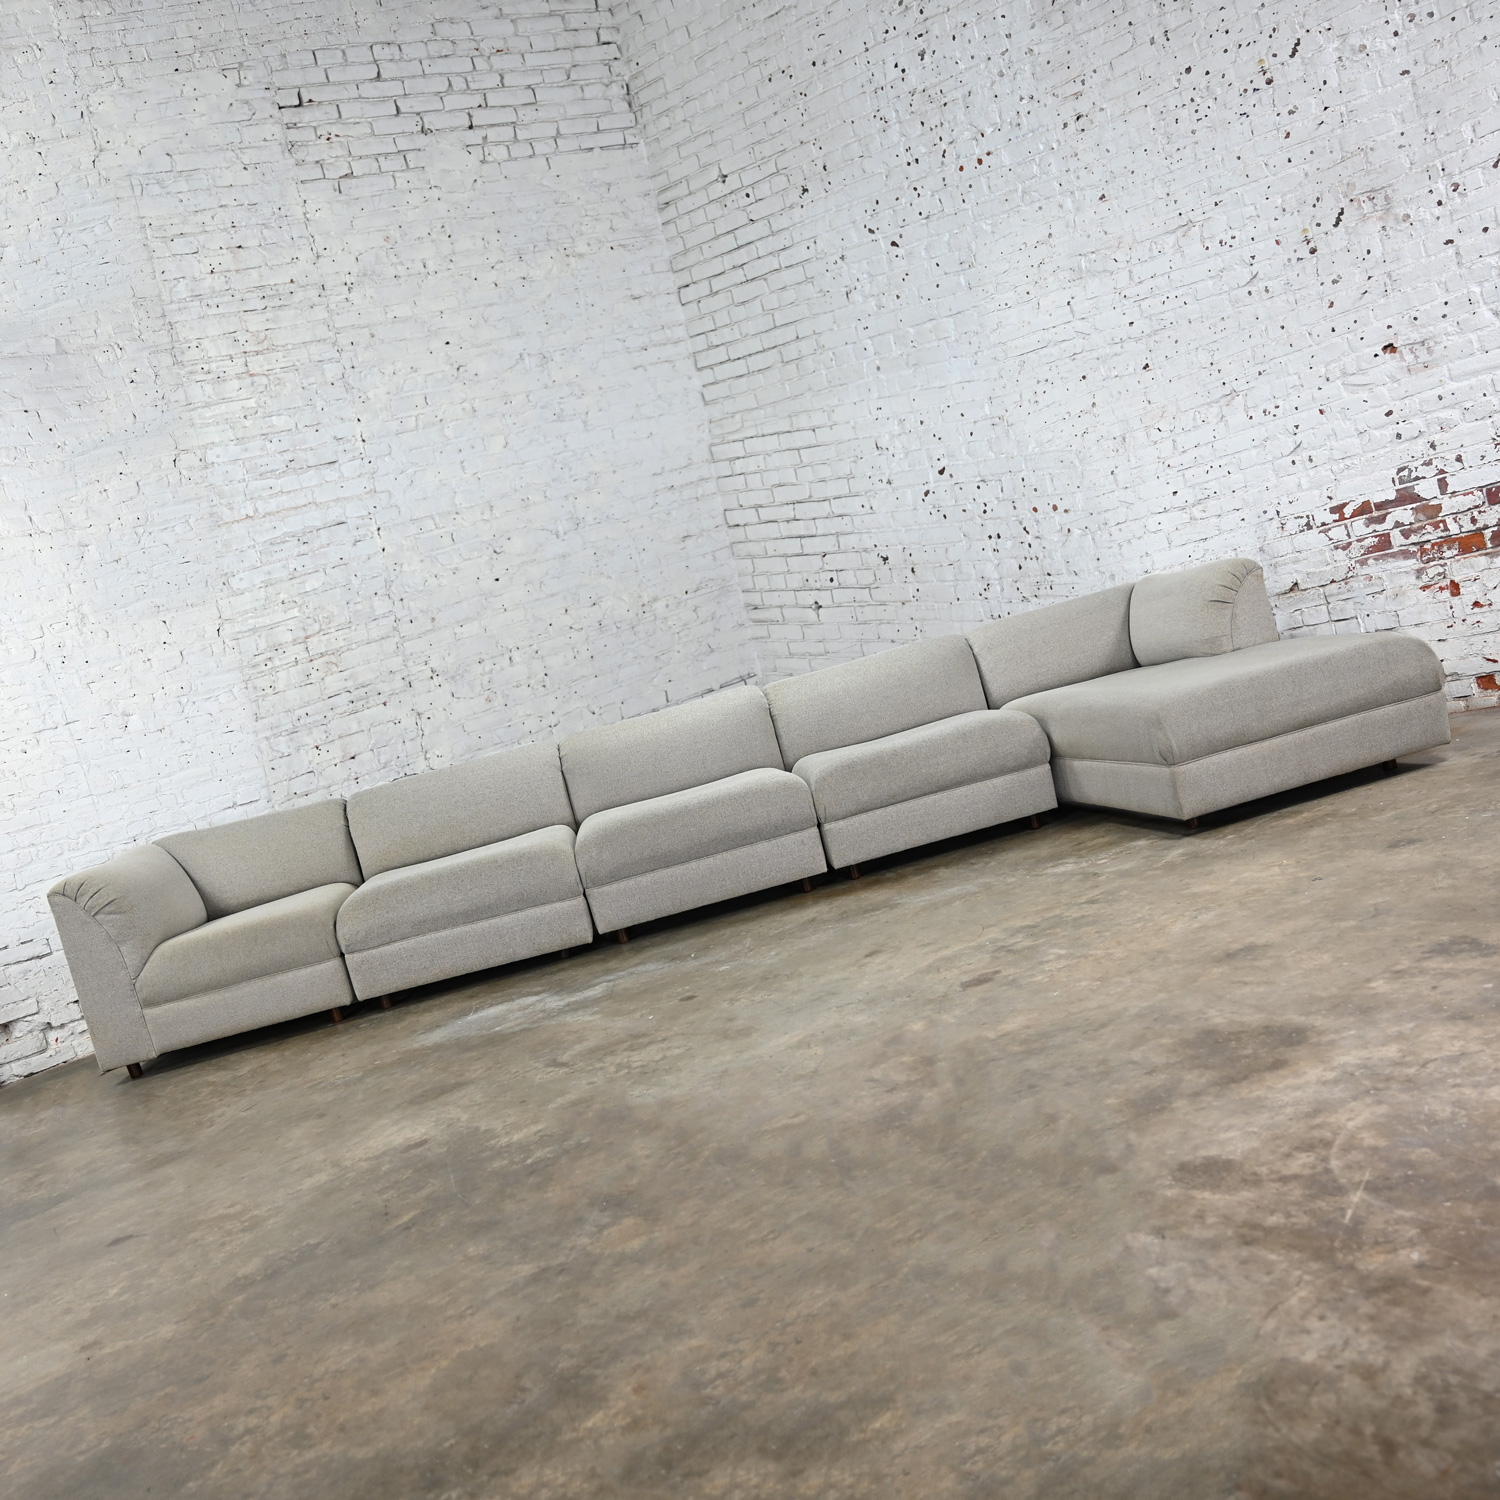 Late 20th Century Modern Modular Sectional Sofa 5 Pieces with Chaise Gray Tweed Fabric